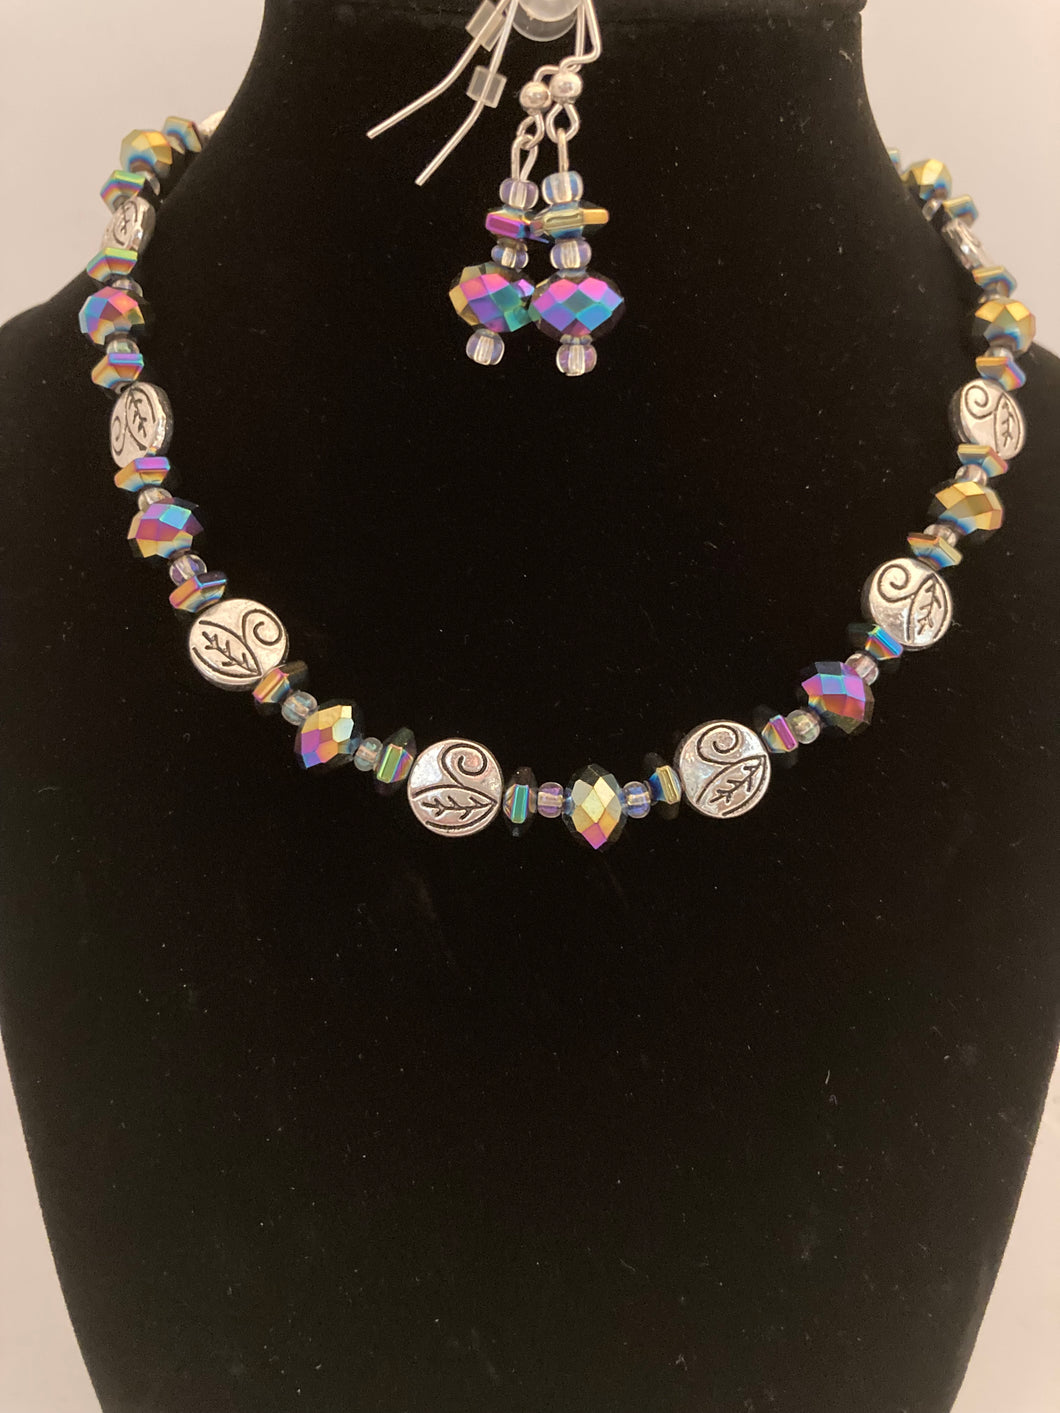 Multi-color rainbow choker with antique silver flower charms and earrings